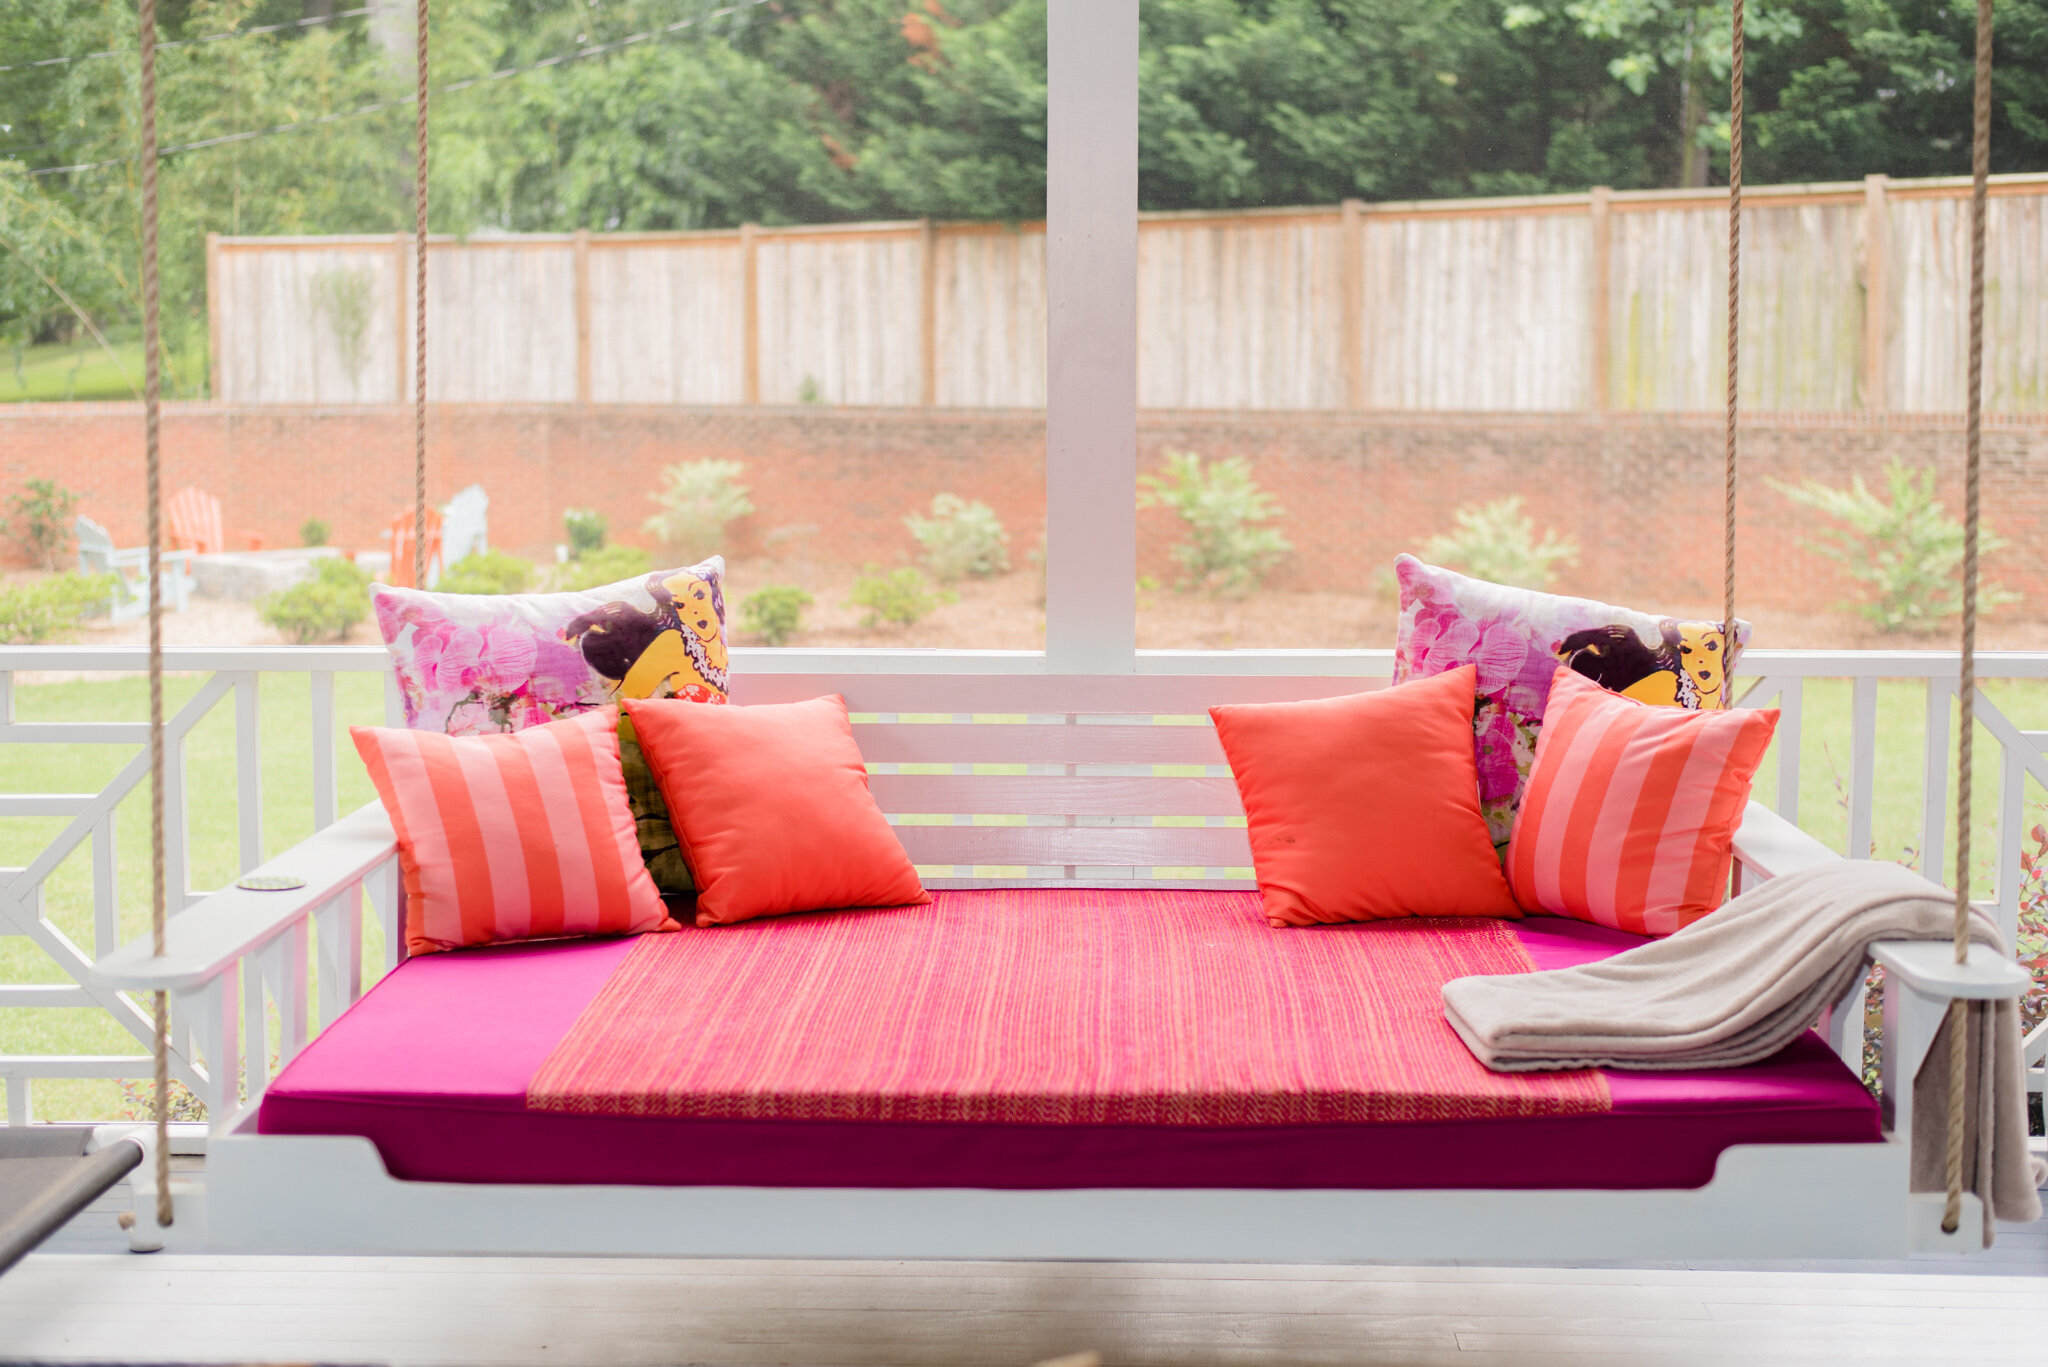 Dwell-Chic-Contemporary-Vibrant-Outdoor-Porch-Swing.jpg